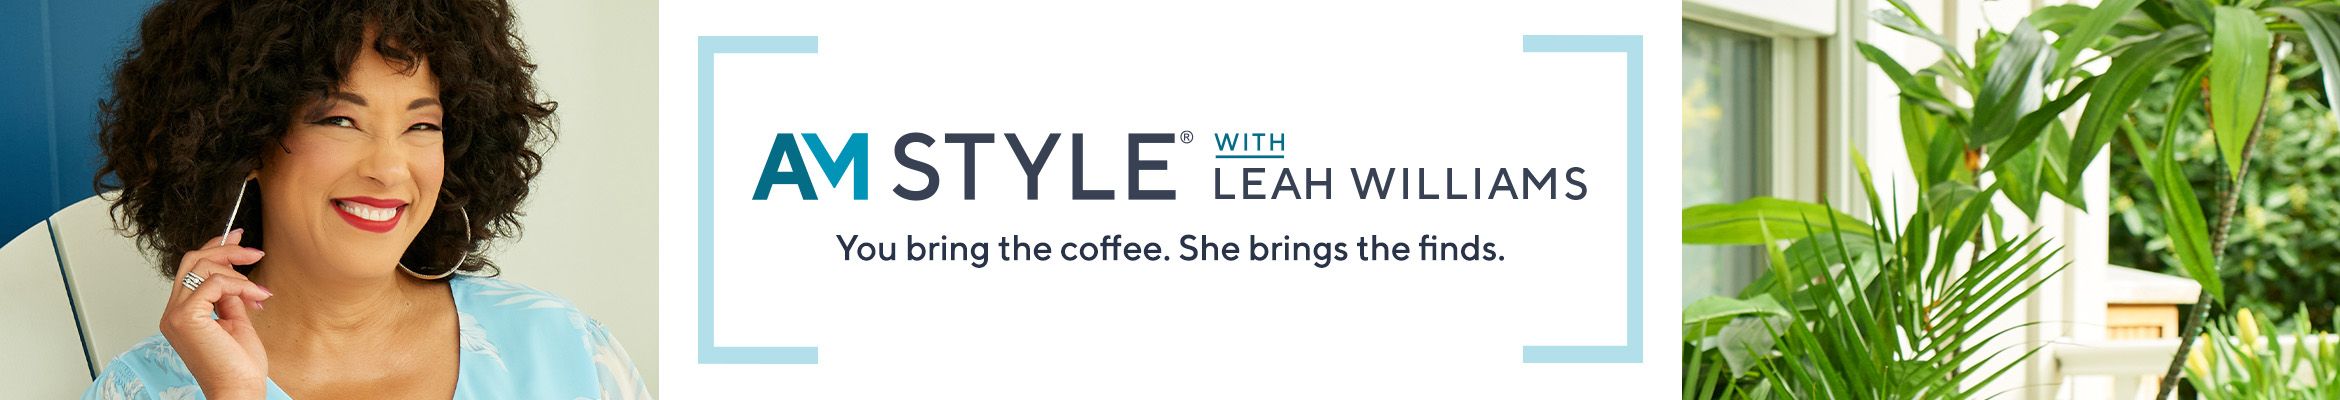 AM Style® with Leah Williams. You bring the coffee. She brings the finds. 